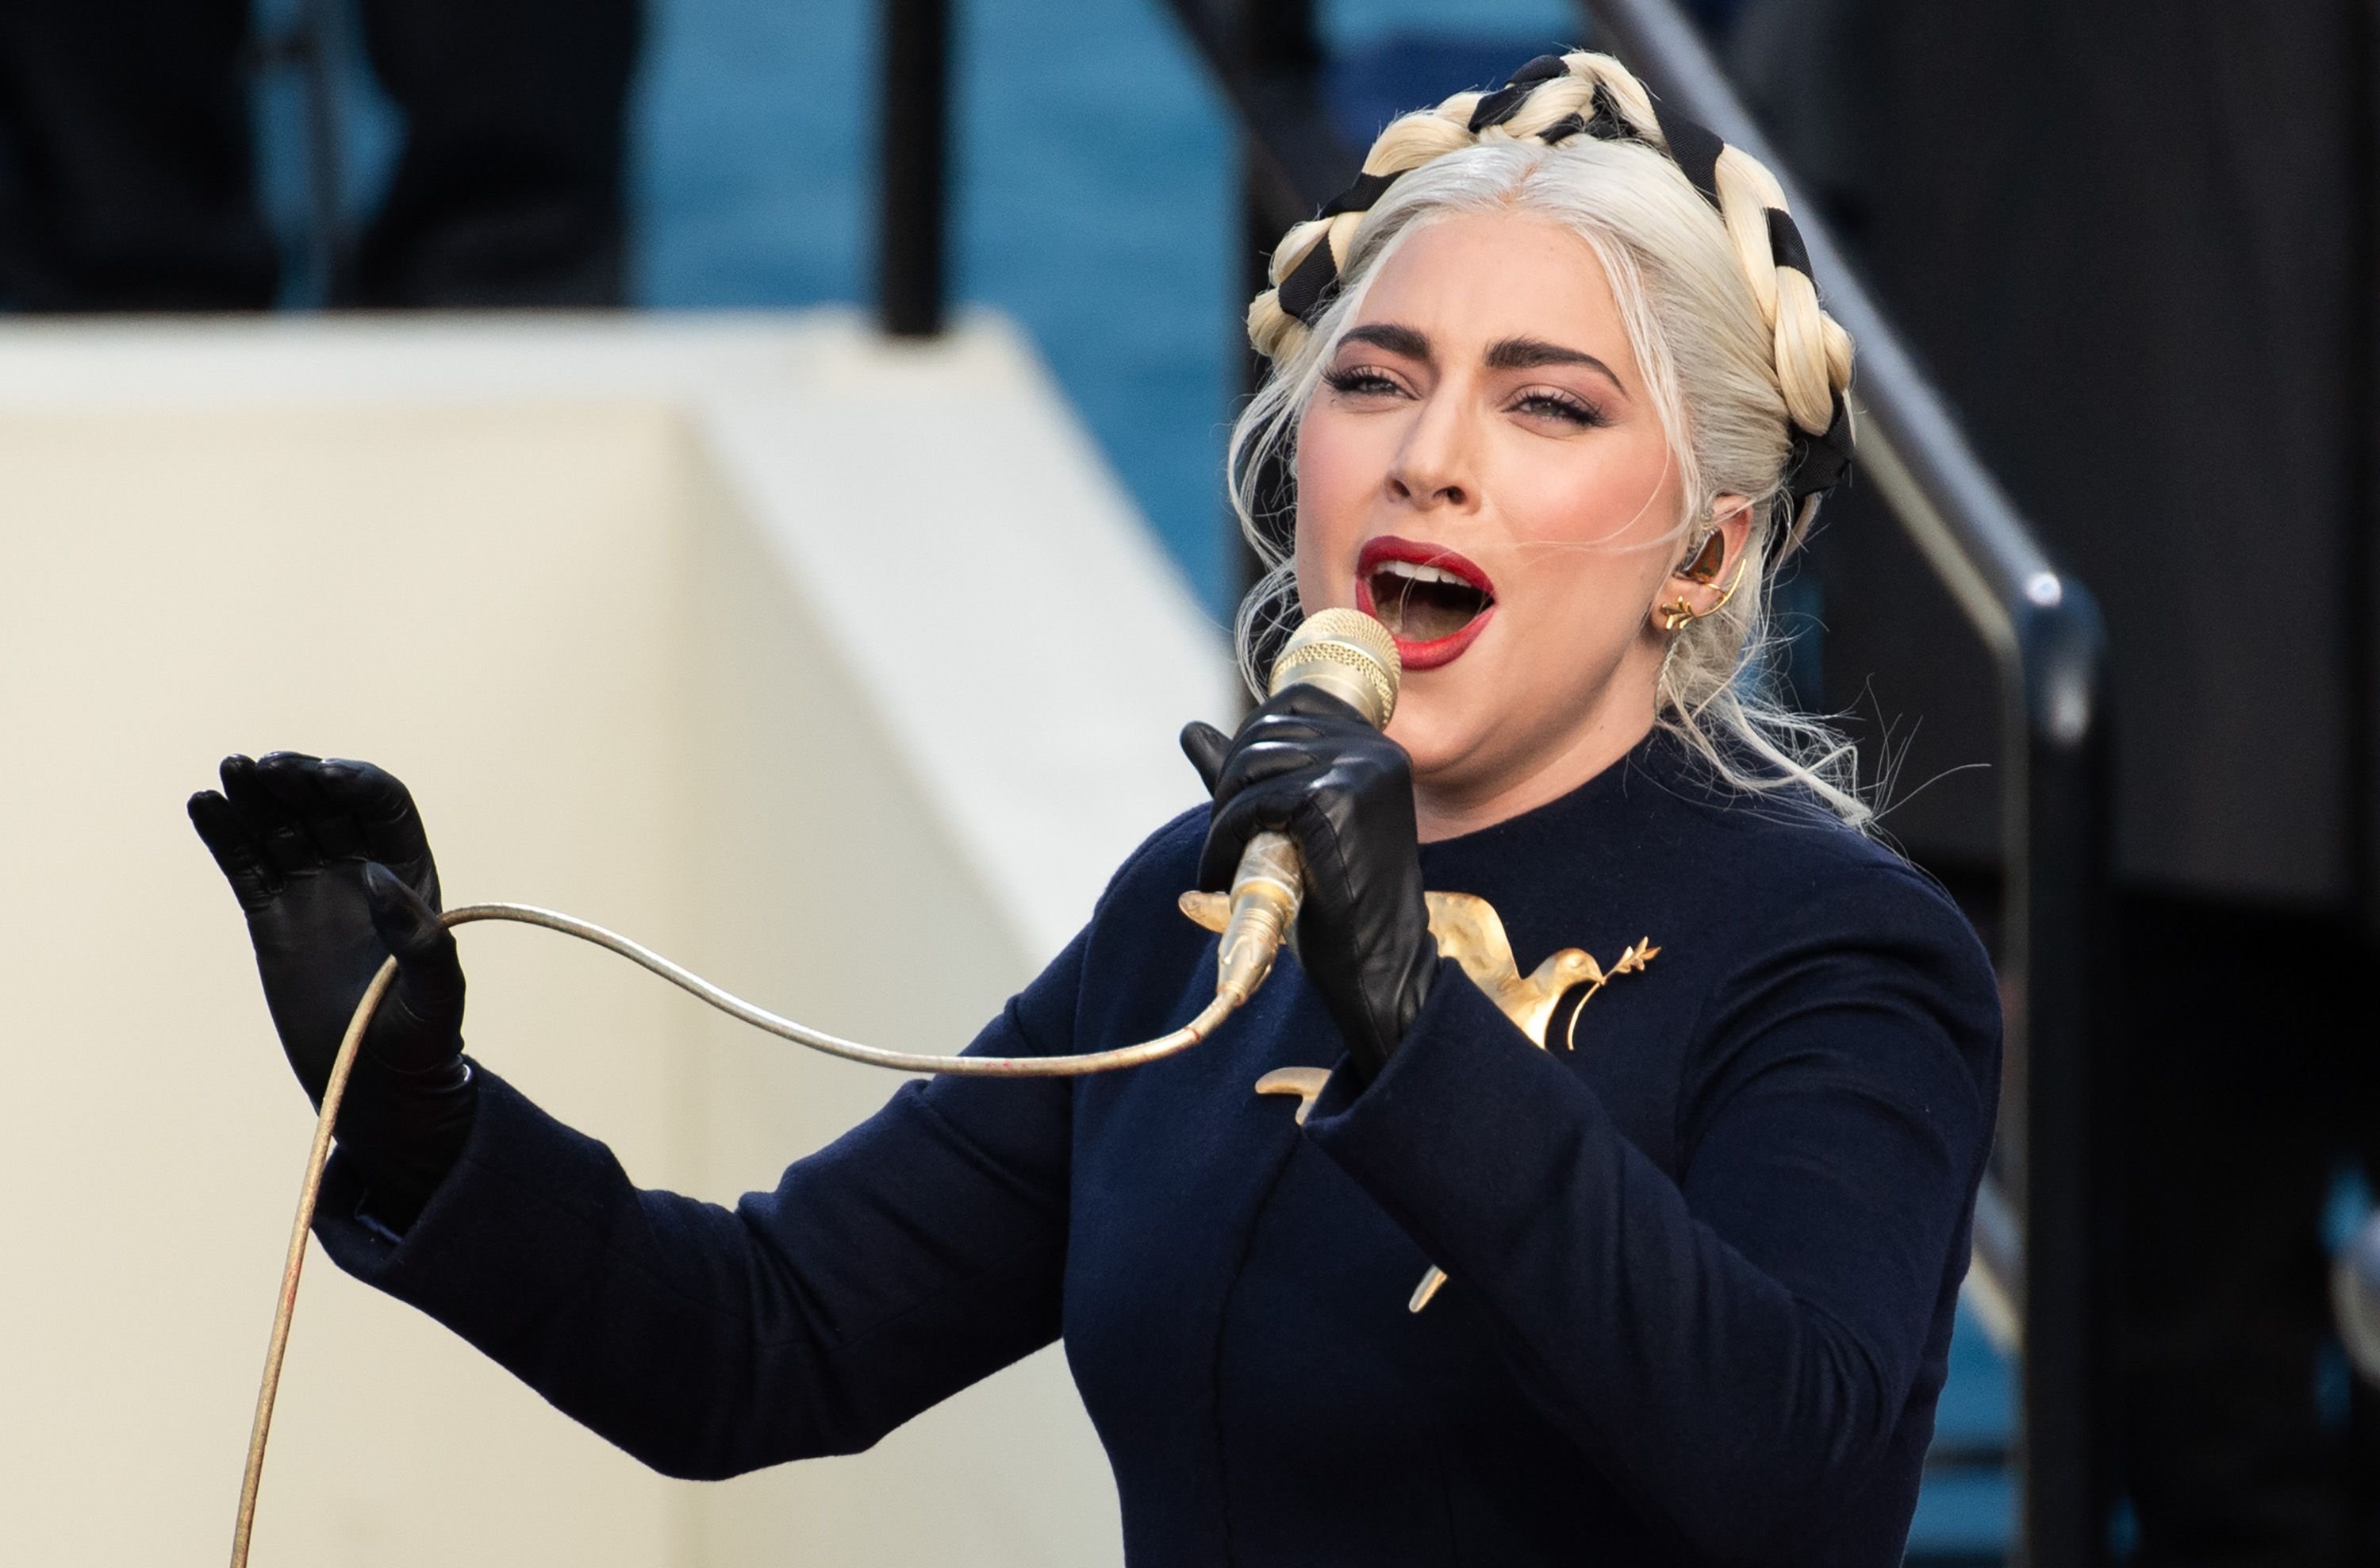  Lady Gaga singing during the 59th Presidential Inauguration at the U.S. Capitol on January 20, 2021 in Washington, DC. | Getty Images  